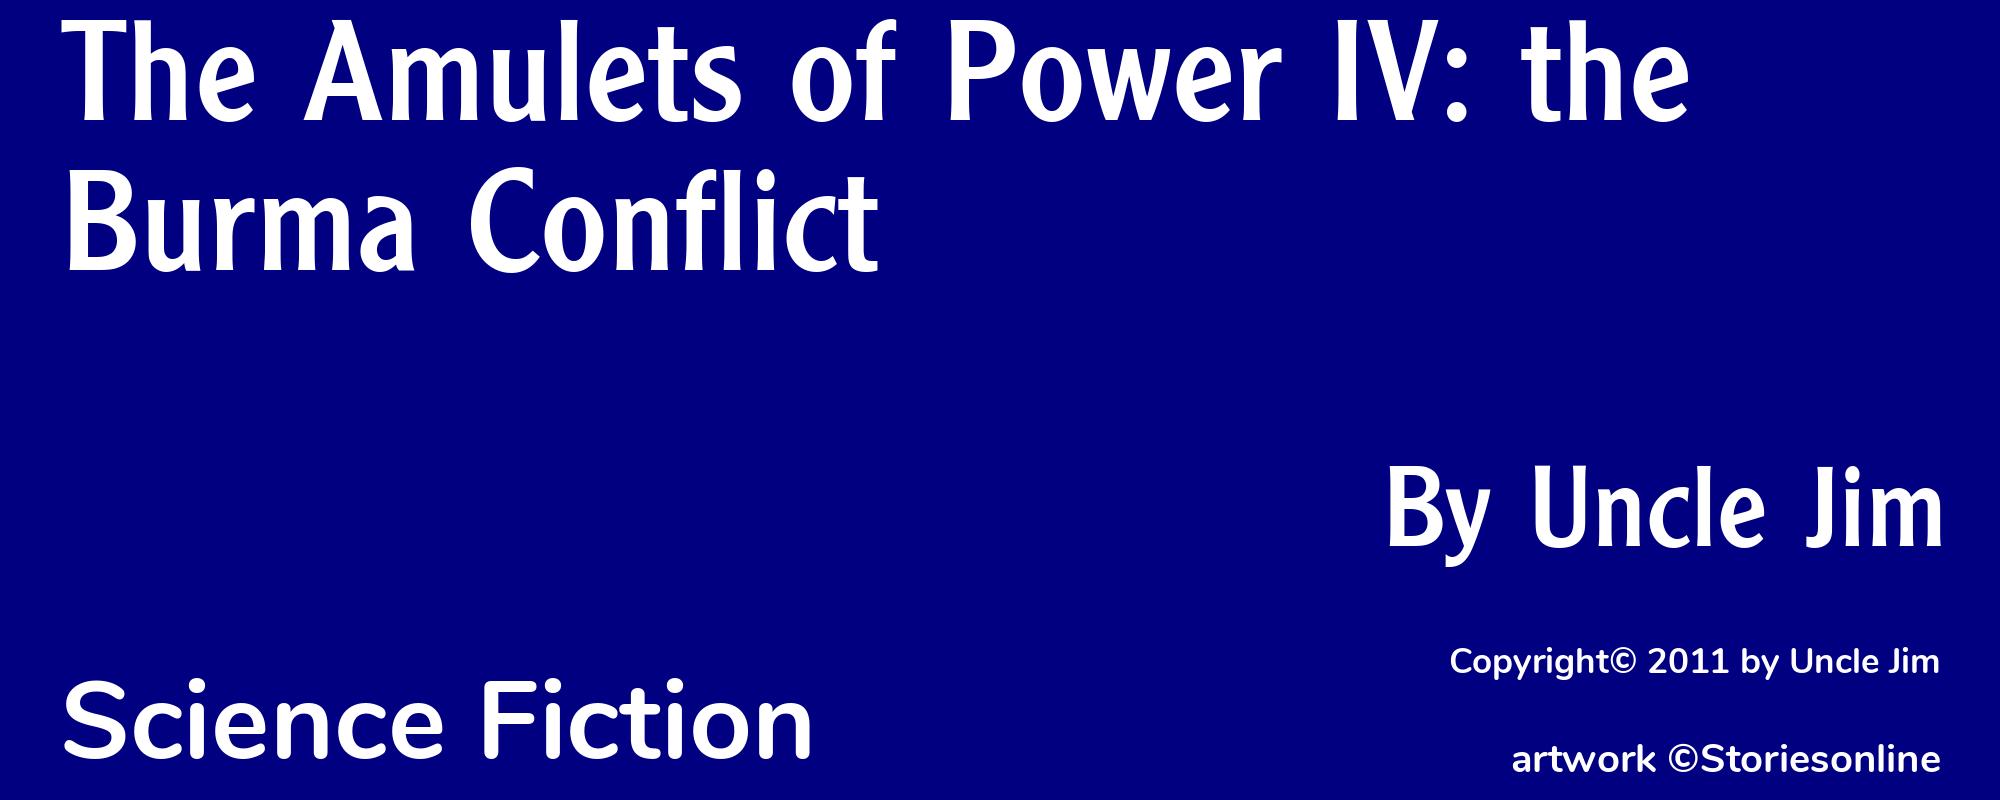 The Amulets of Power IV: the Burma Conflict - Cover